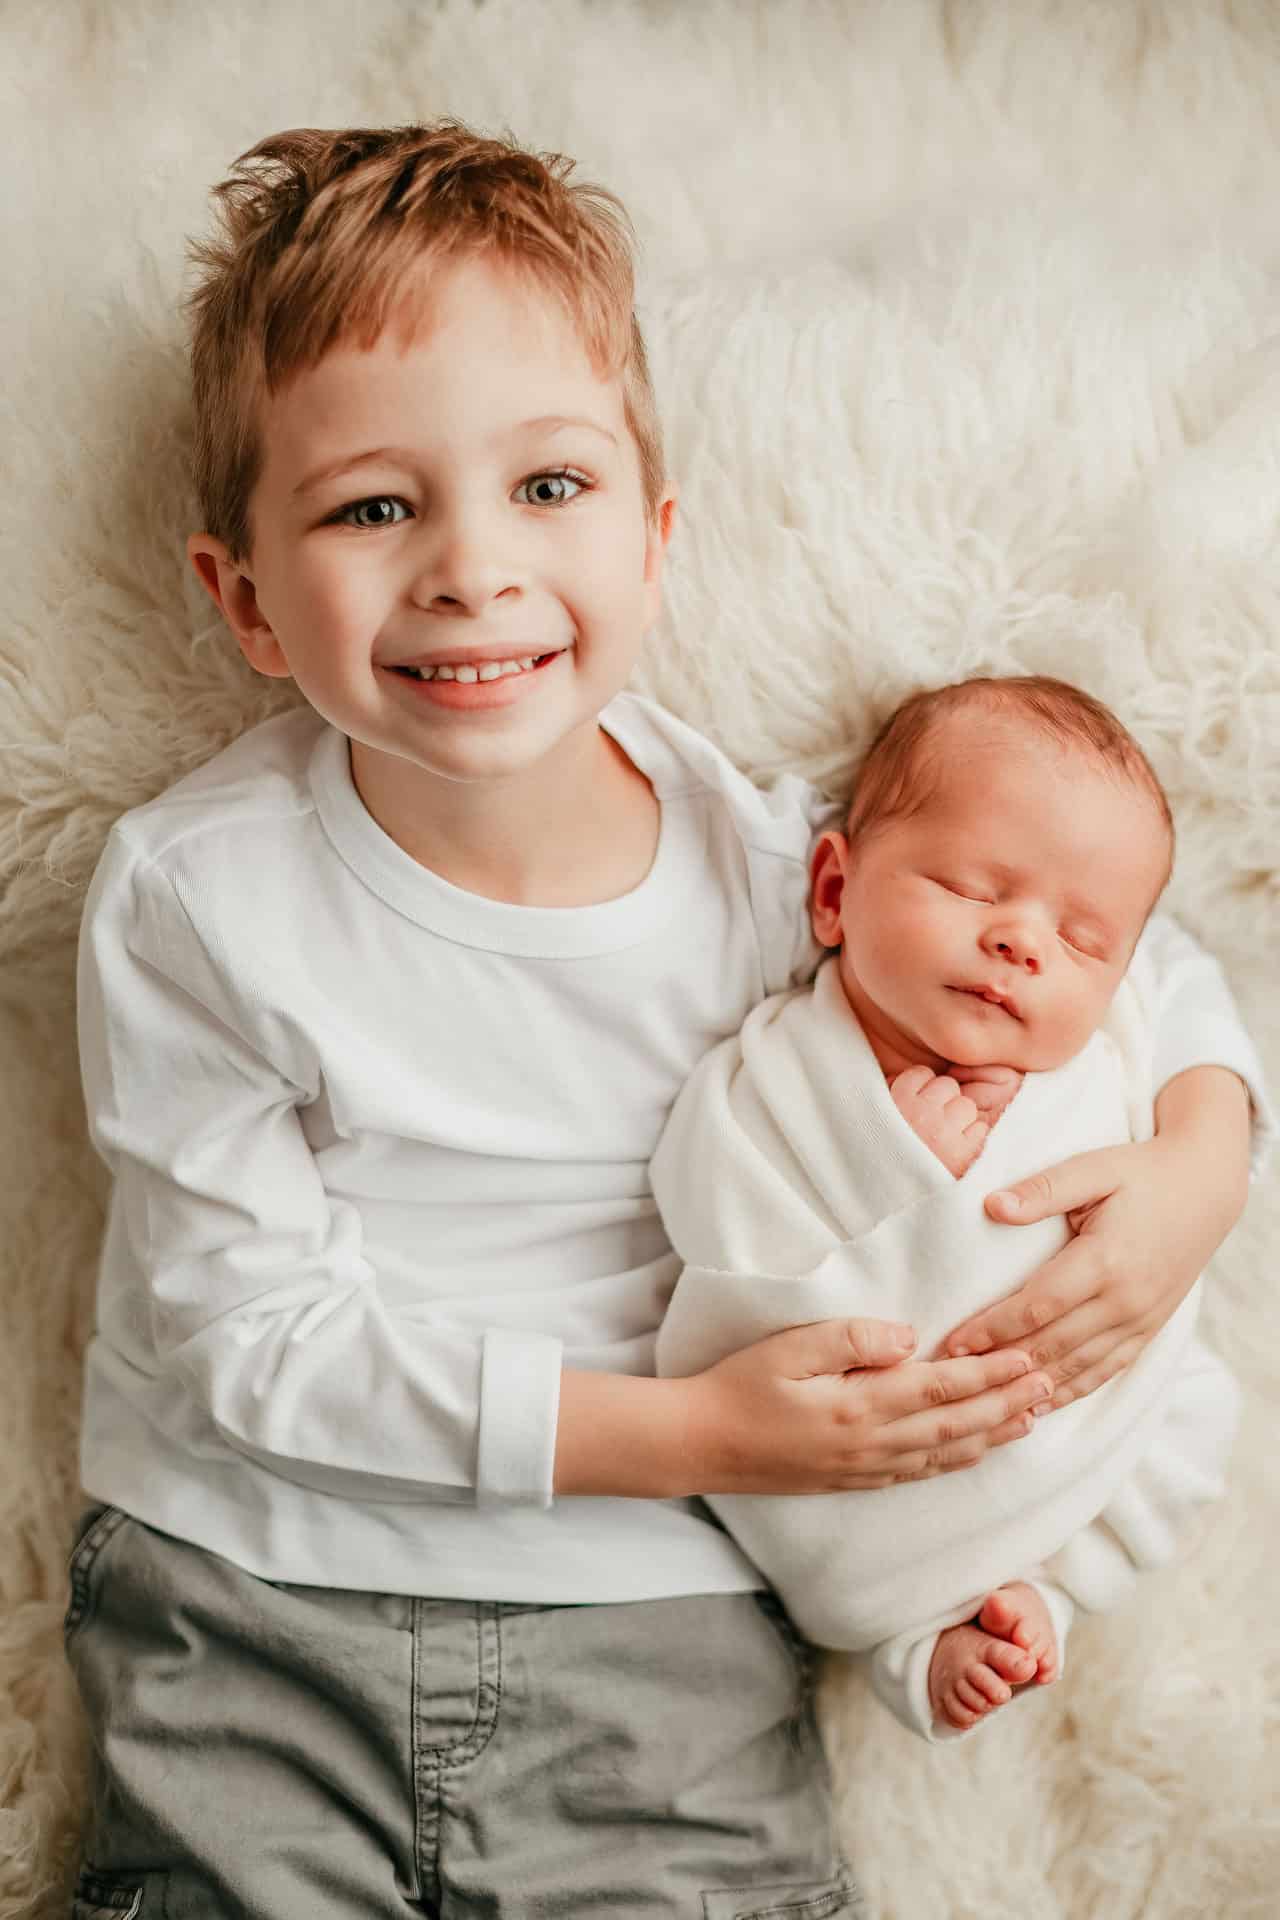 Big brother proudly holding newborn baby brother